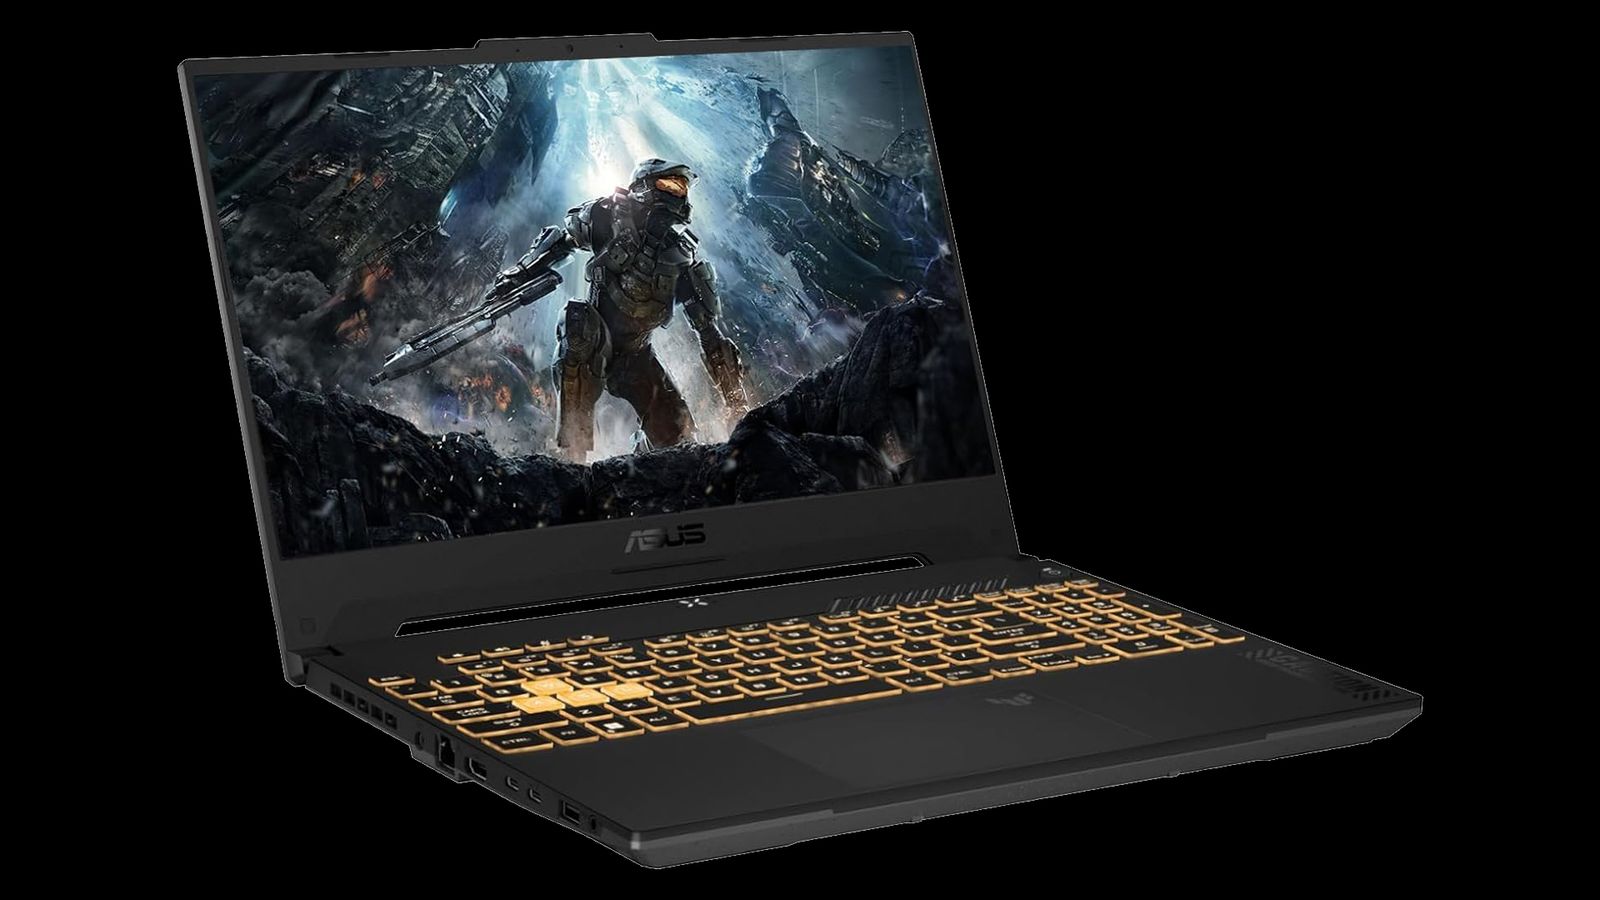 ASUS TUF Gaming F15 product image of a black laptop with yellow backlit keys and footage from Halo on the display.